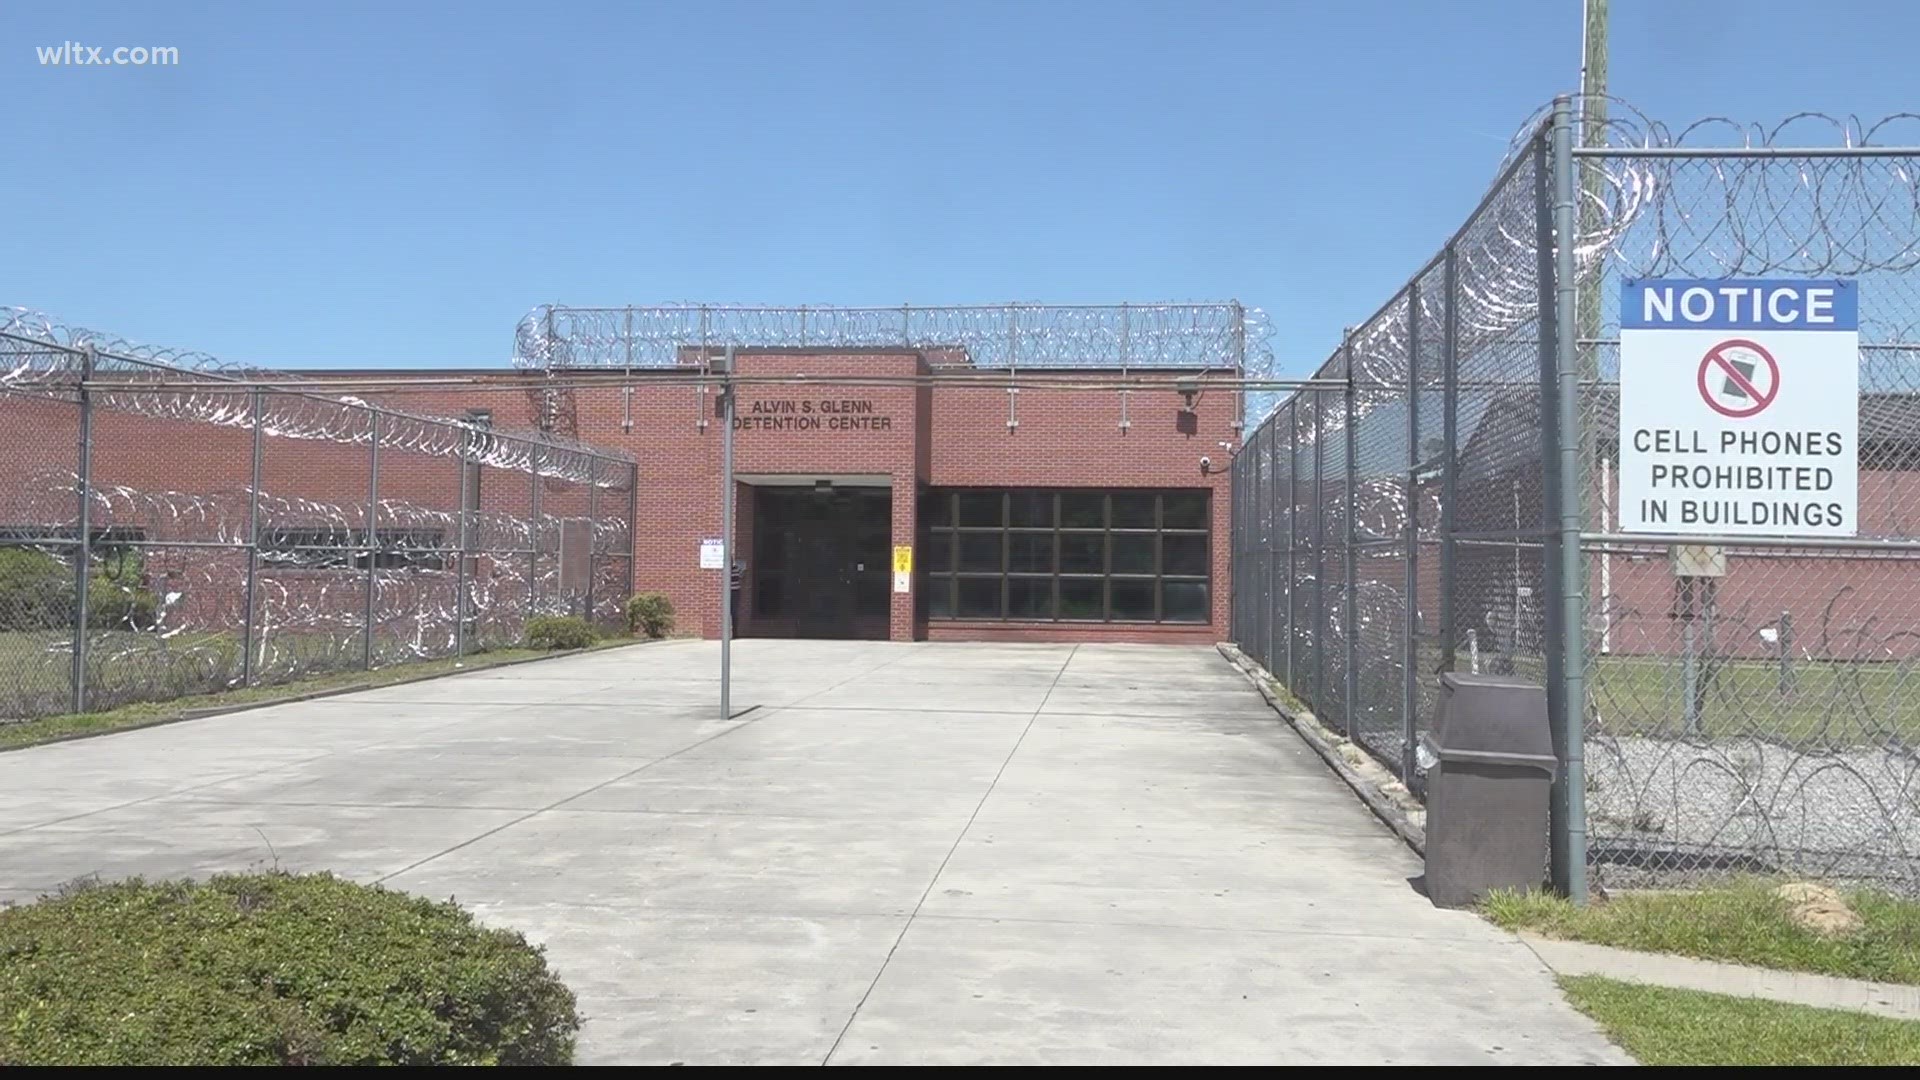 The plan came after the SC Department of Corrections requested a strategic plan from the county to address concerns.